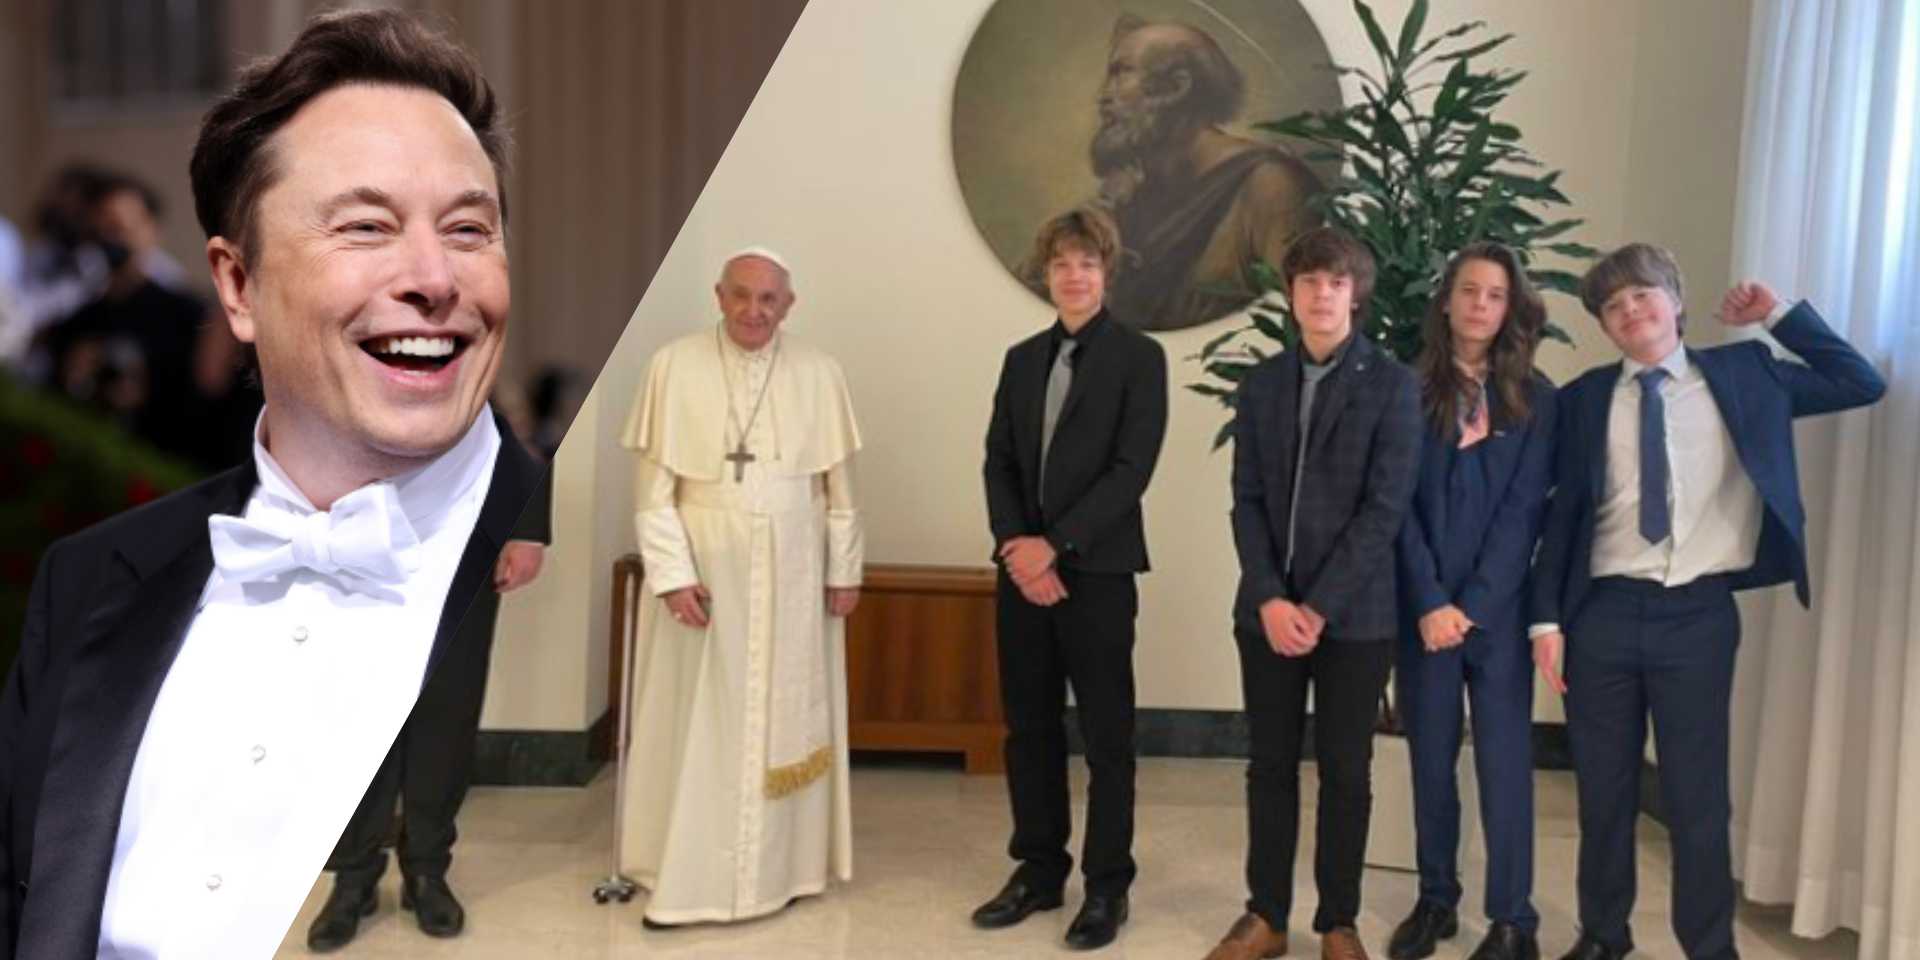 Elon Musk expresses excitement as he visits Pope Francis with his children